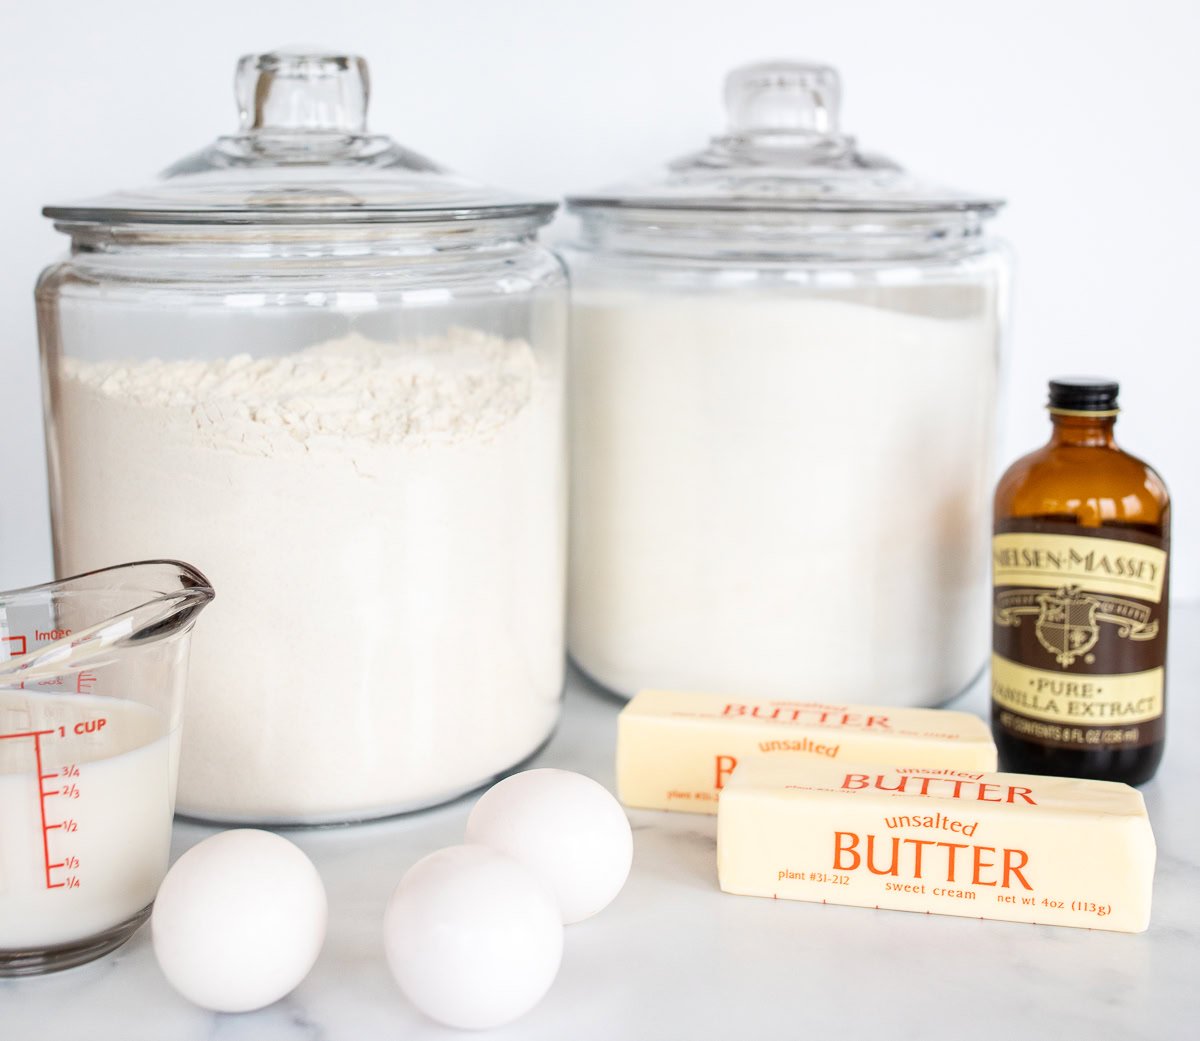 Ingredients and baking substitutions arranged on a kitchen counter, including jars of flour and sugar, eggs, butter, a glass measuring cup, and vanilla extract.